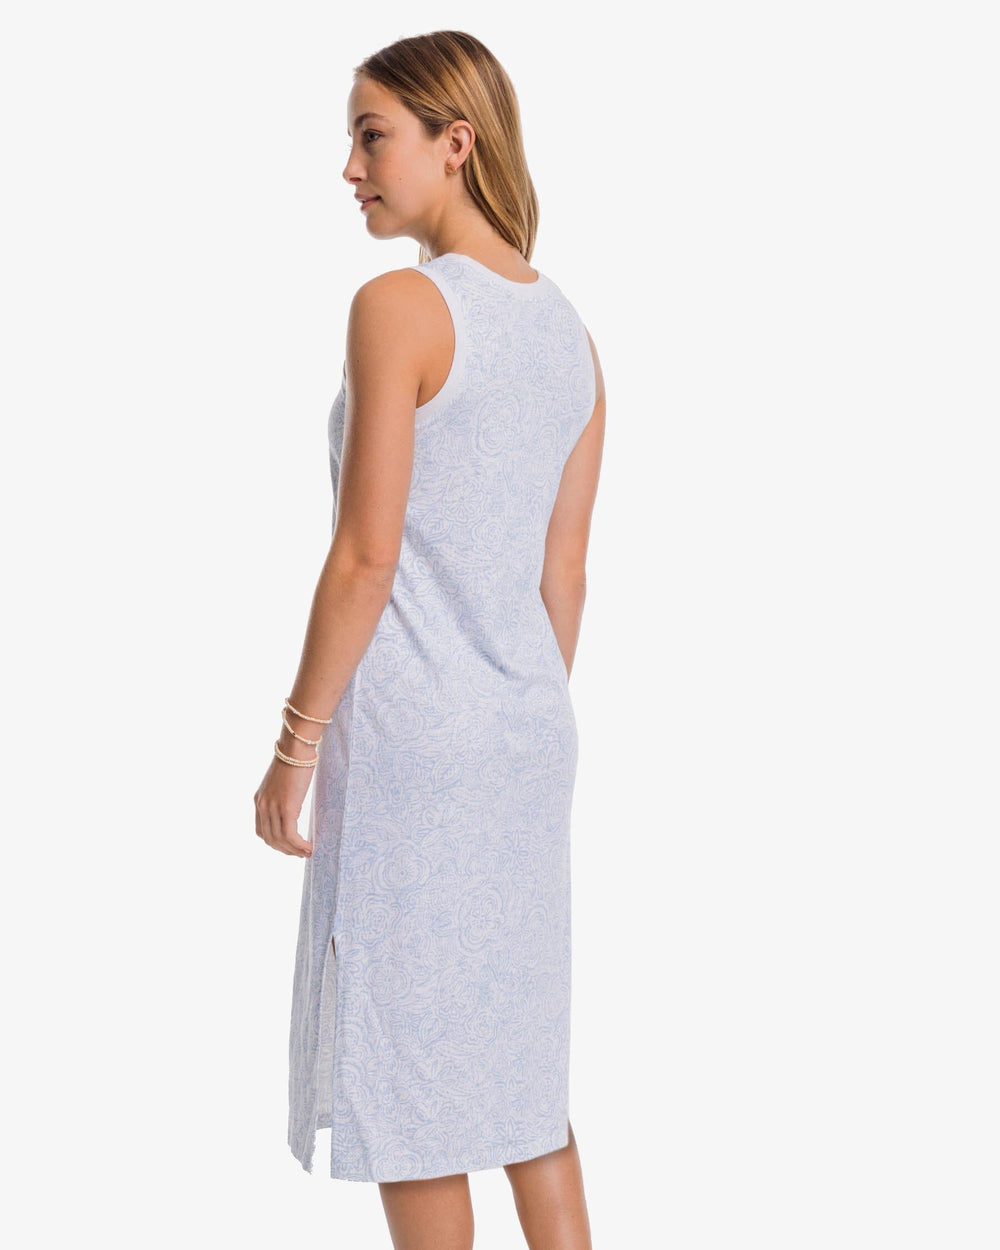 The back view of the Southern Tide Delaney Forever Floral Sun Farer Tank Dress by Southern Tide - Sky Blue